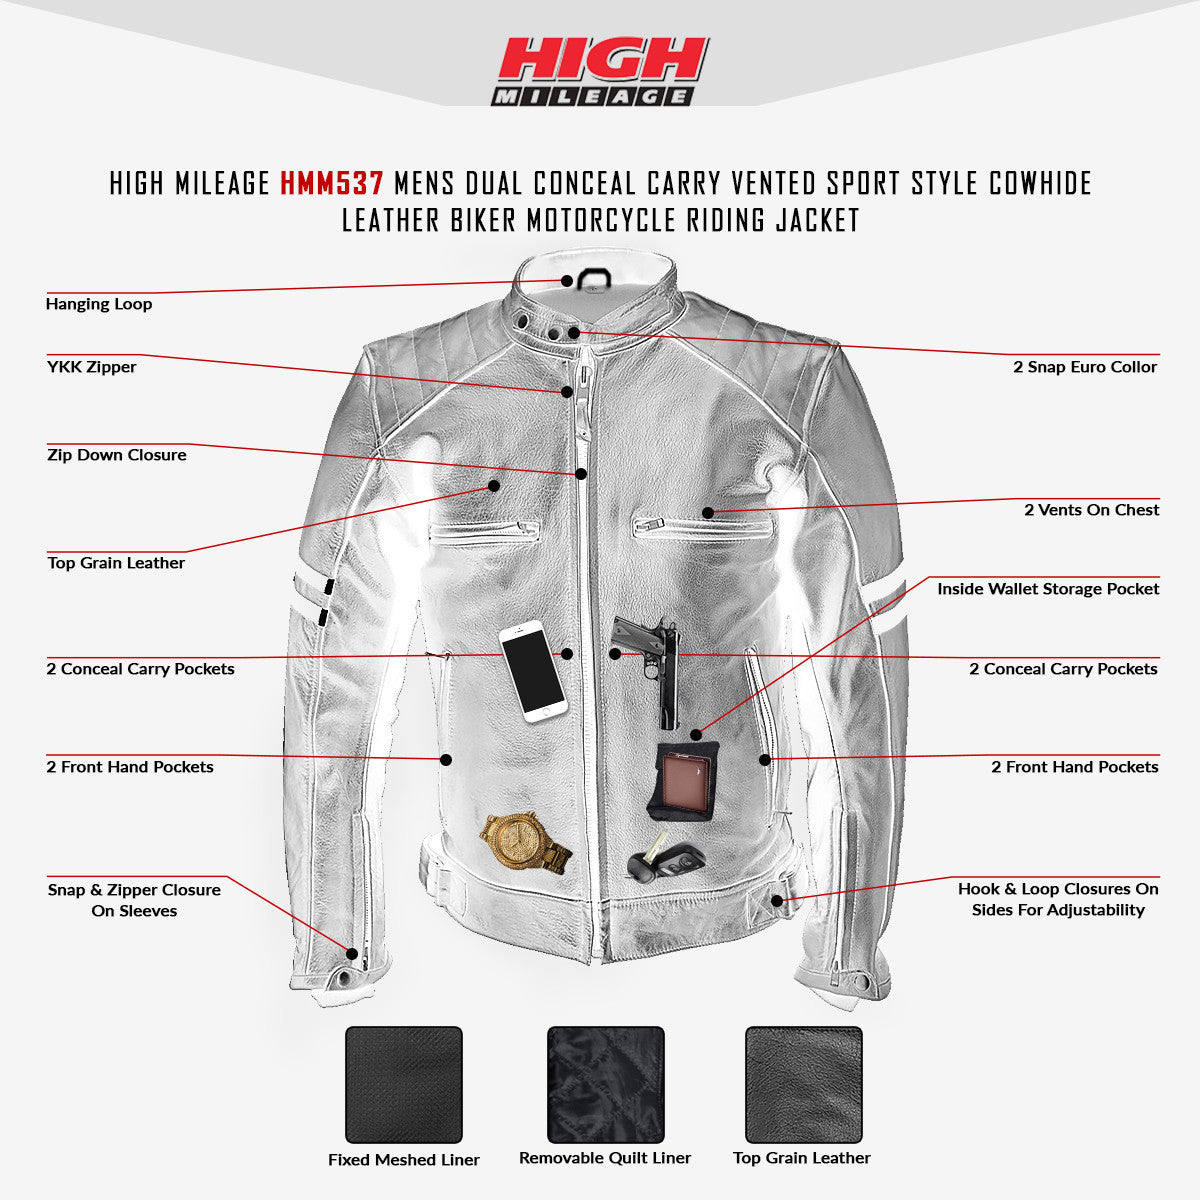 High Mileage HMM537 Mens Dual Conceal Carry Vented Sport Style Cowhide Leather Biker Motorcycle Riding Jacket - Infographics